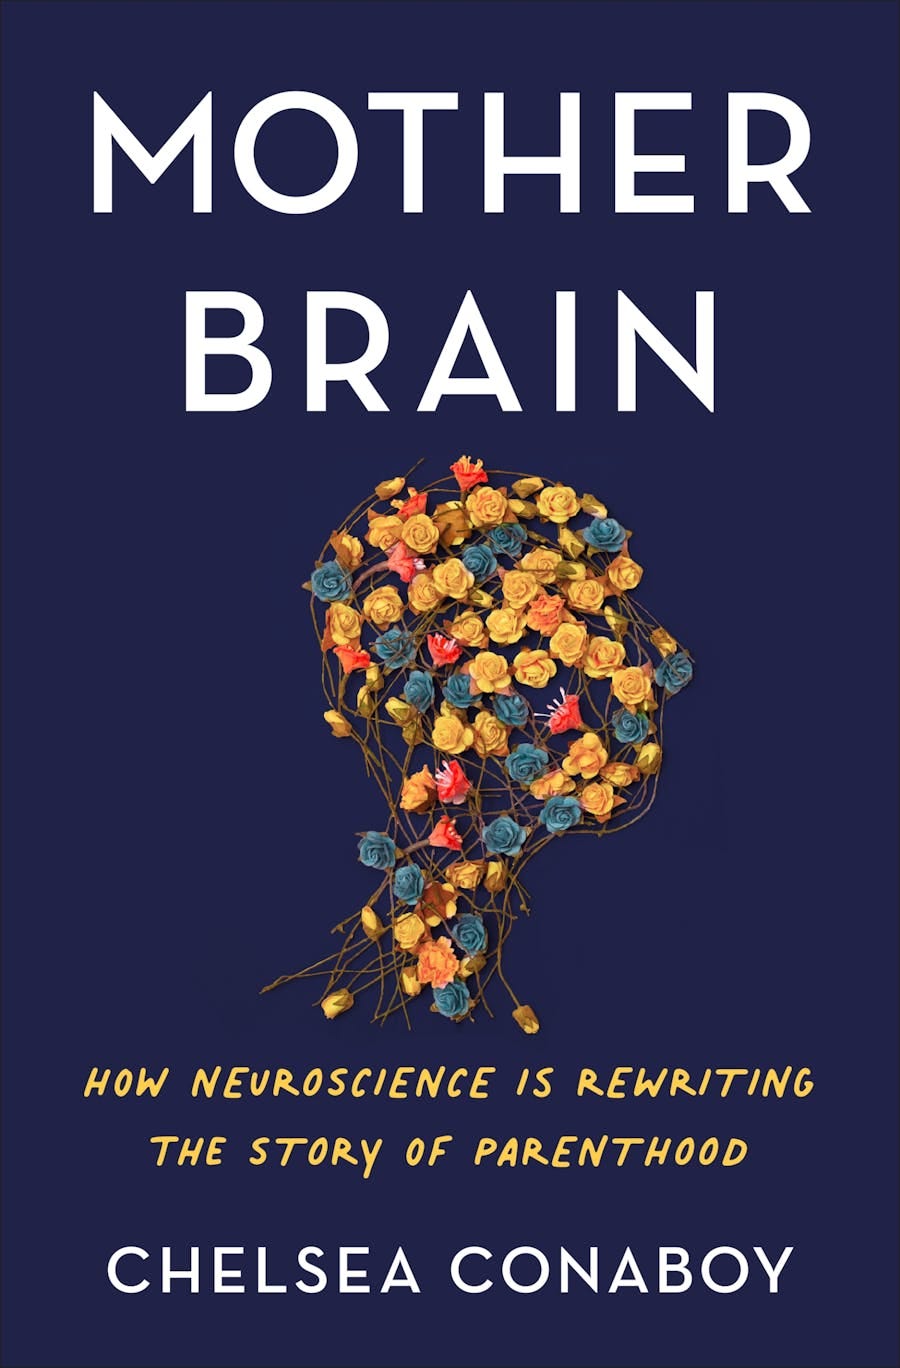 Cover of the book Mother Brain: How Neuroscience is Rewriting the Story of Parenthood by Chelsea Conaboy. The book shows stylized flowers arranged in a shape that resembles a person's head seen in profile. 